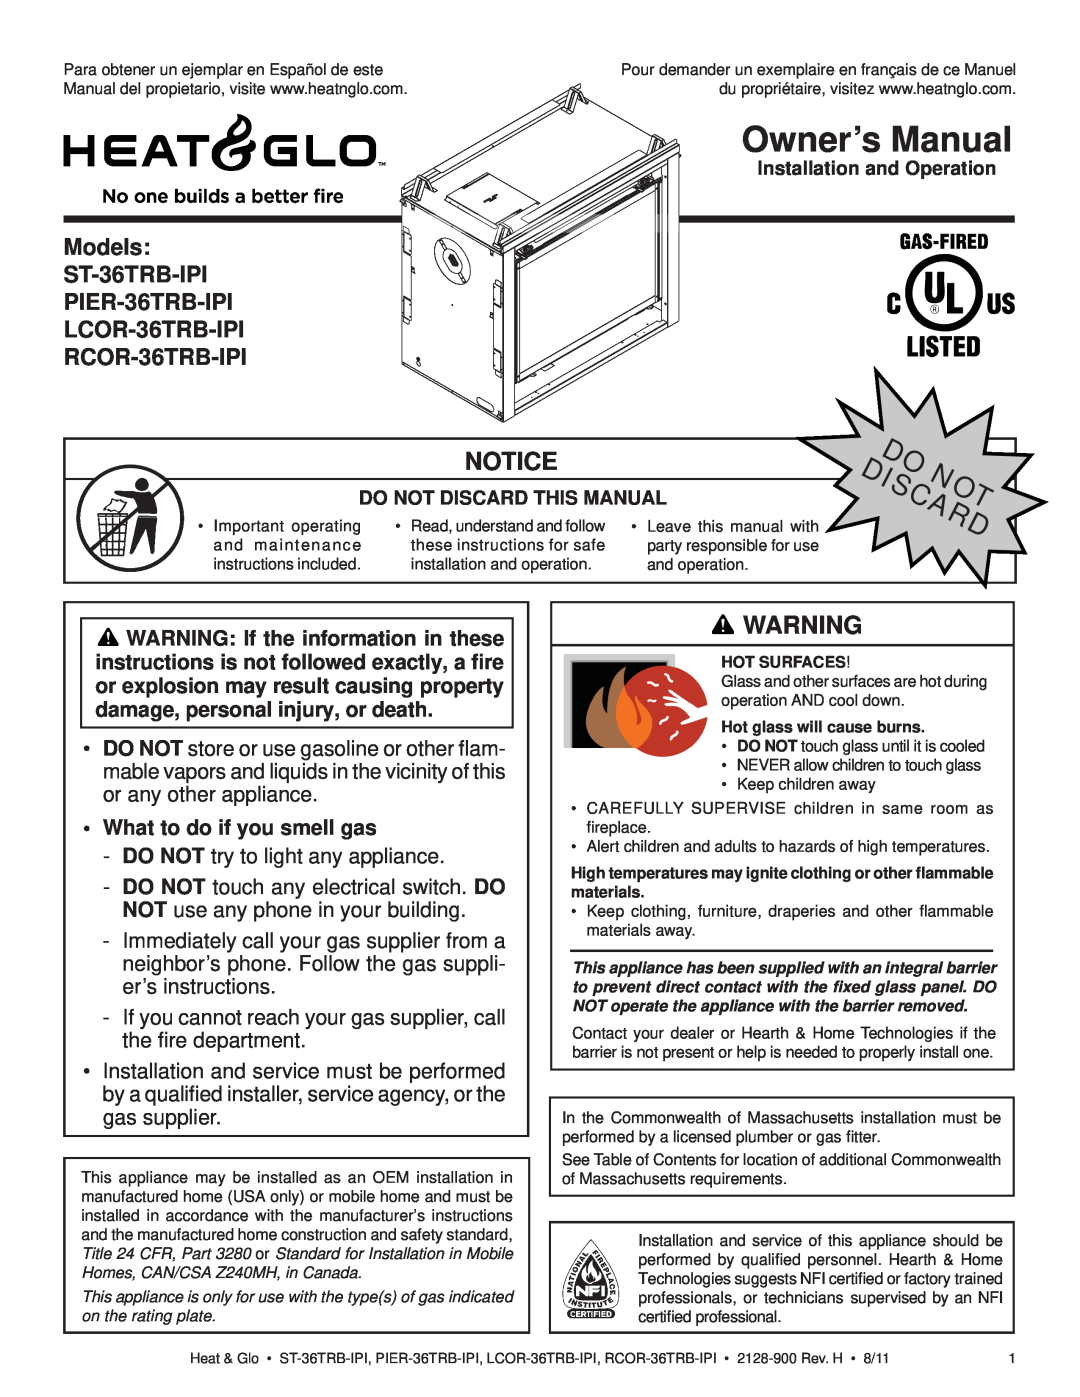 Heat & Glo LifeStyle ST-36TRB-IPI owner manual Notice, •What to do if you smell gas, Owner’s Manual 